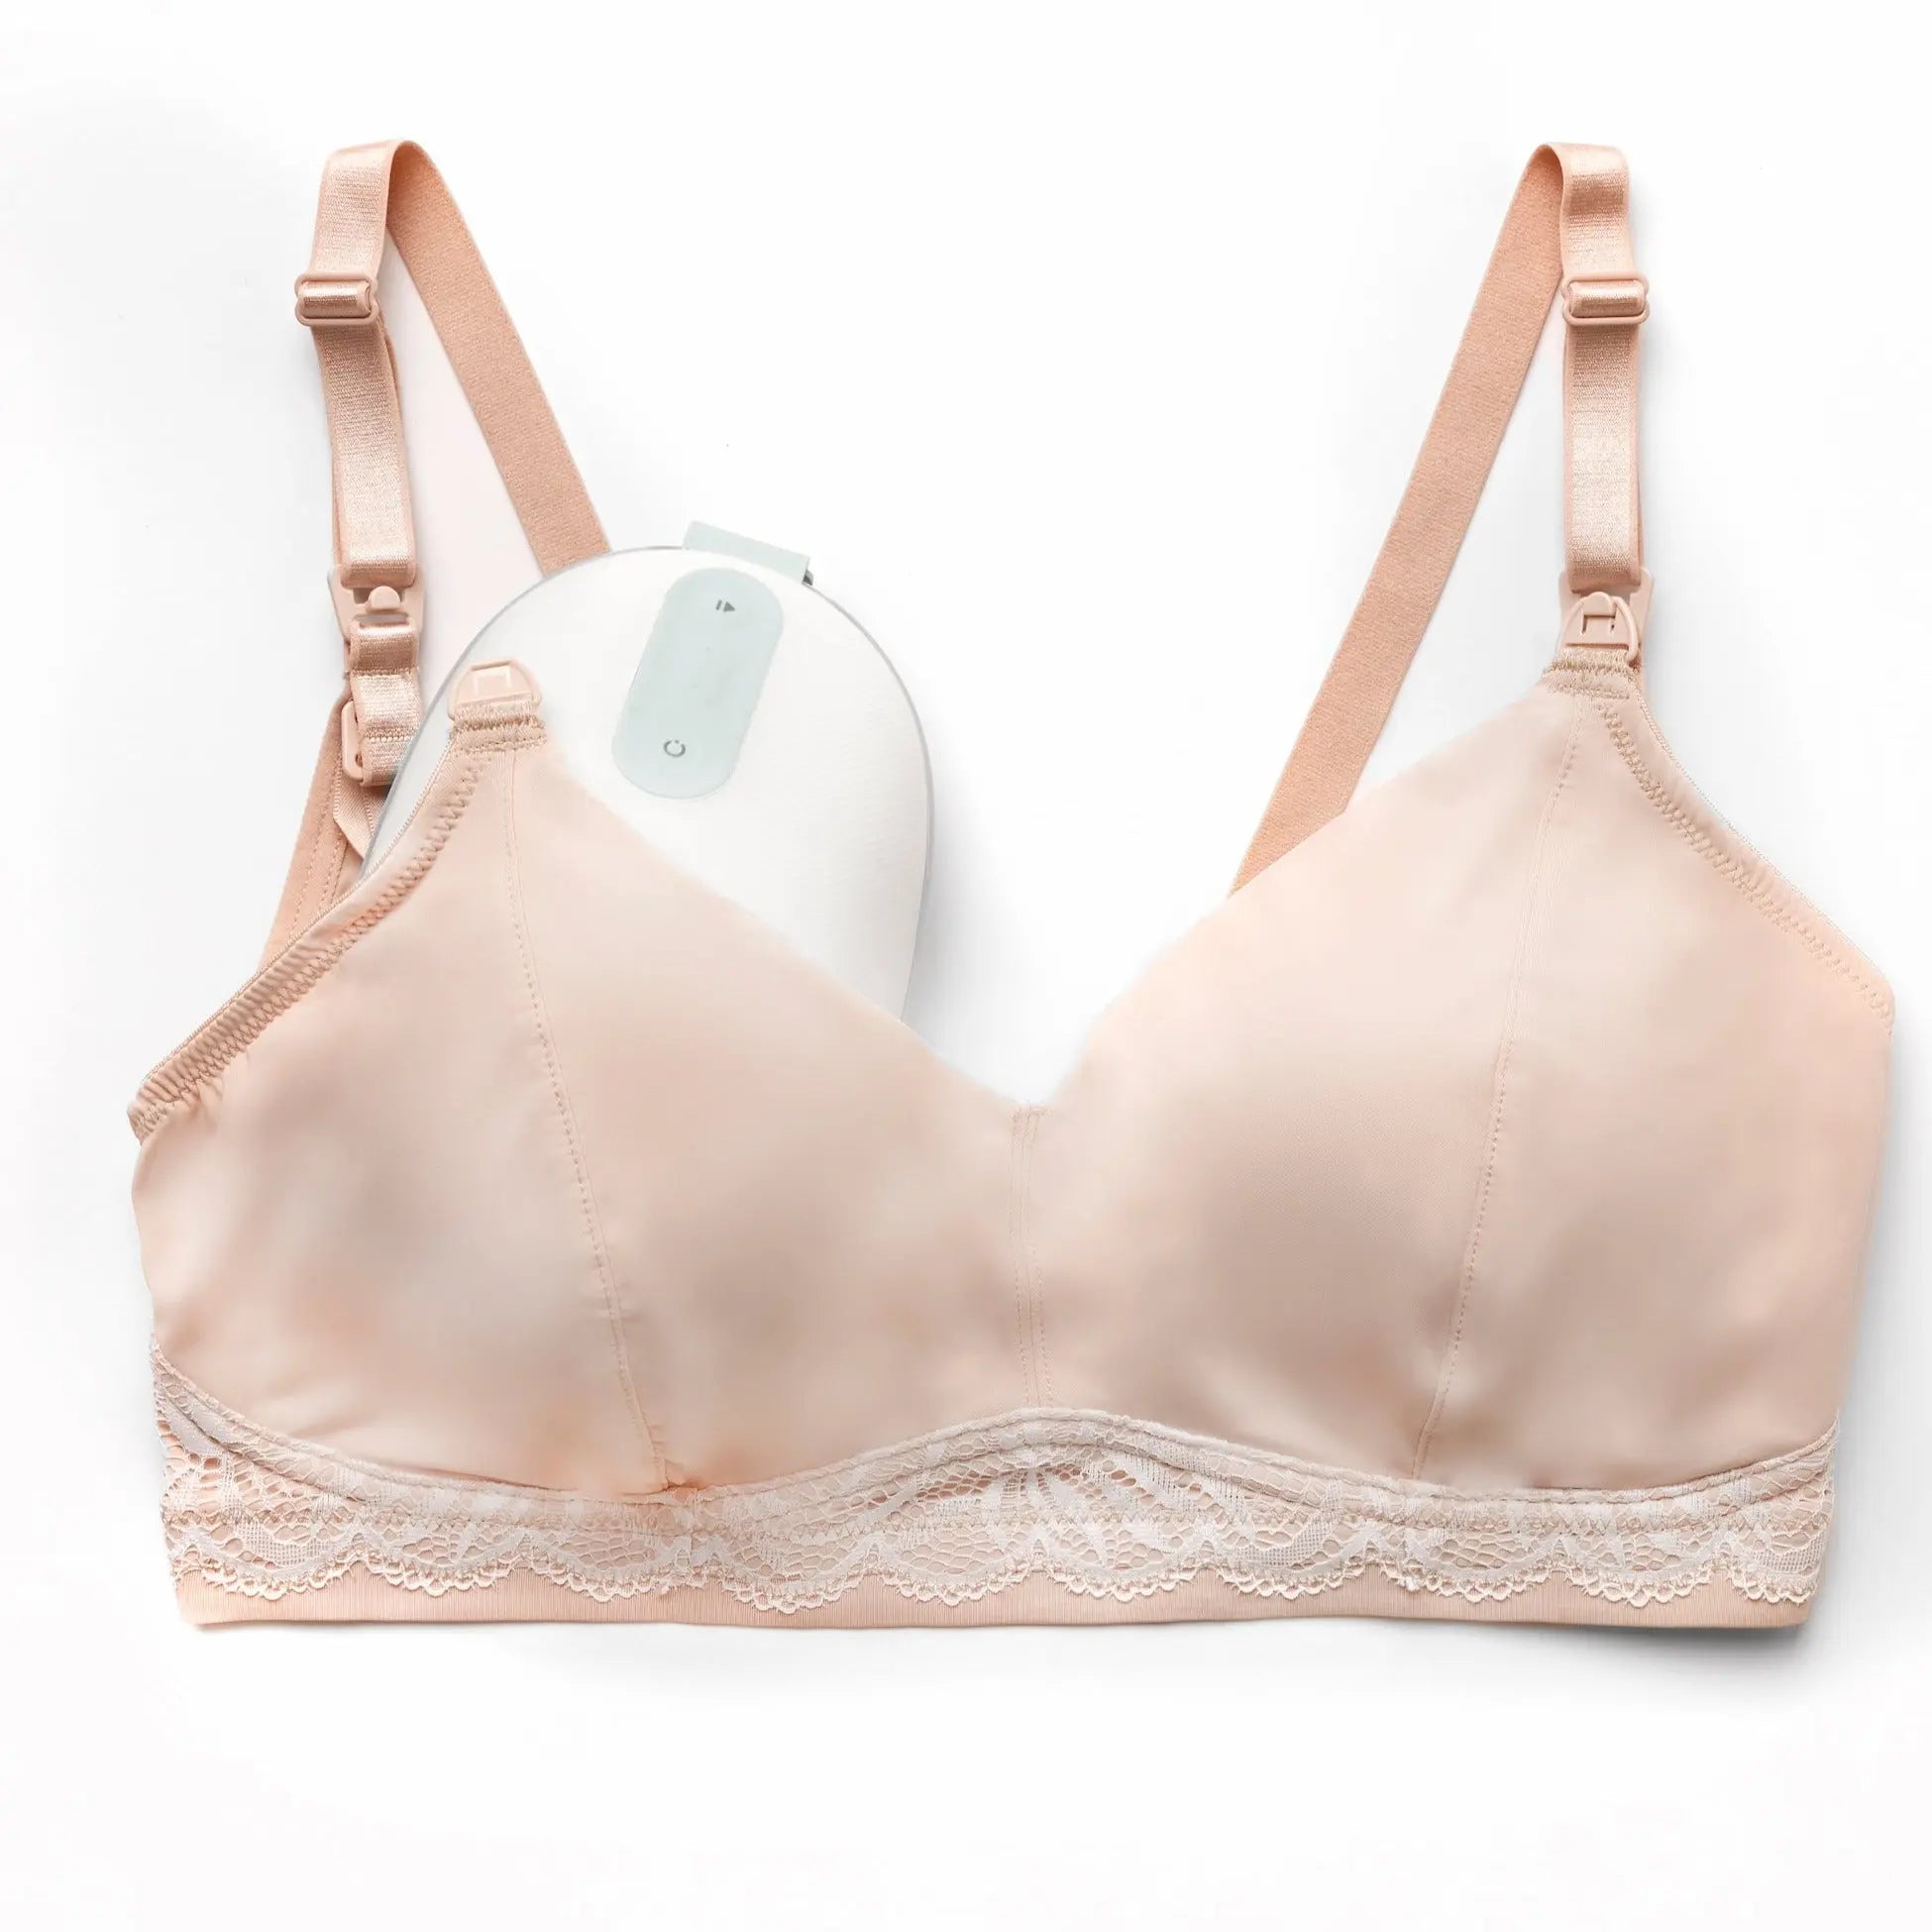 Luxe pumping bra champagne flatlay image